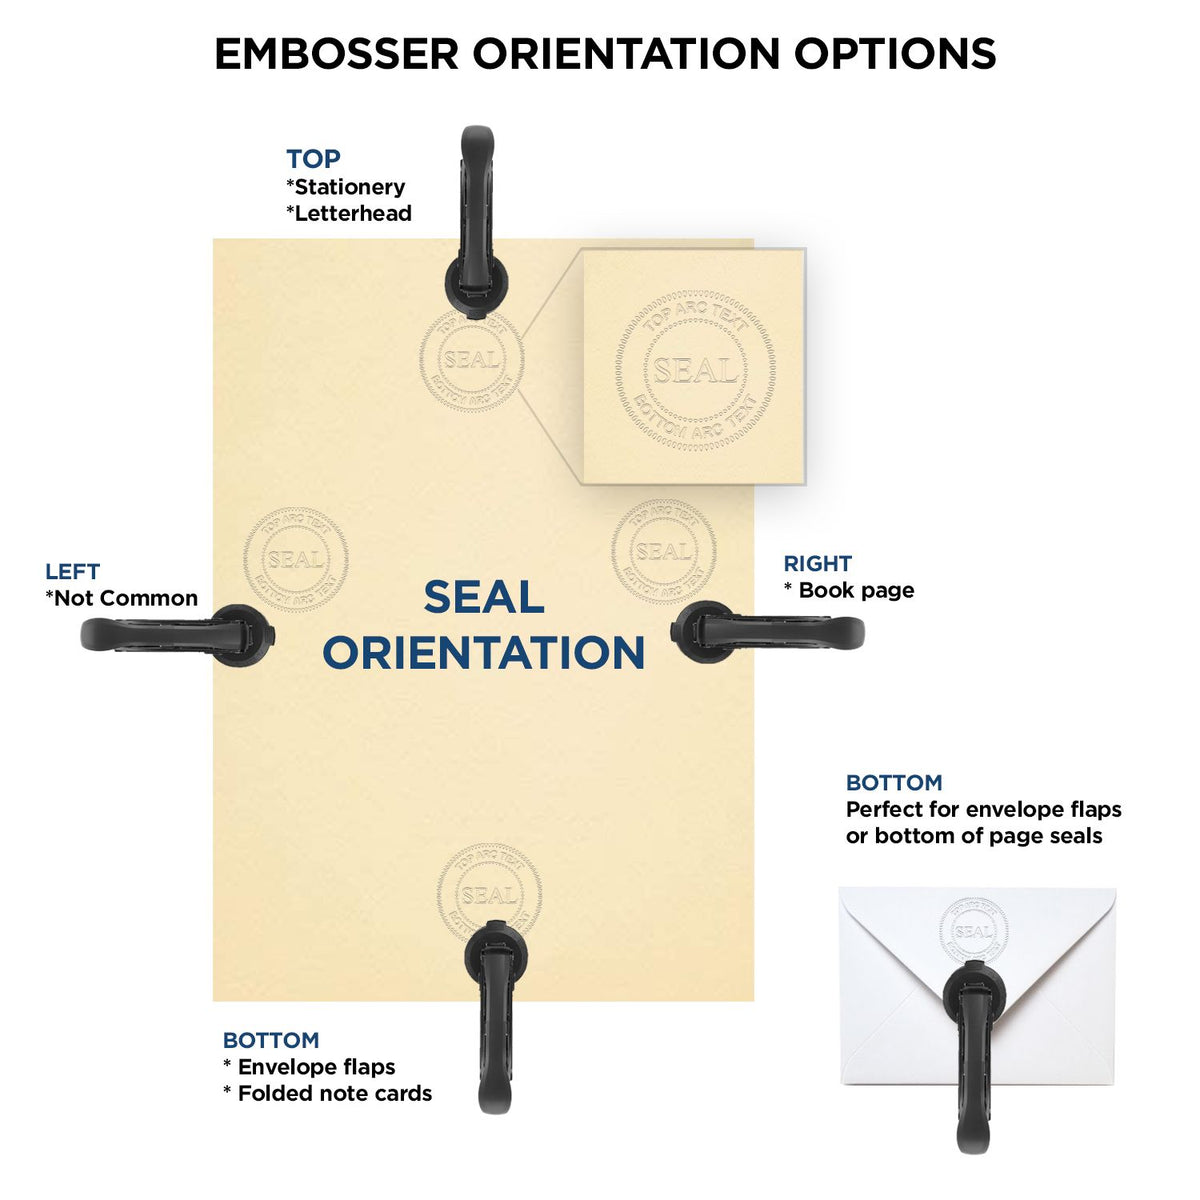 An infographic for the Handheld Pennsylvania Professional Engineer Embosser showing embosser orientation, this is showing examples of a top, bottom, right and left insert.